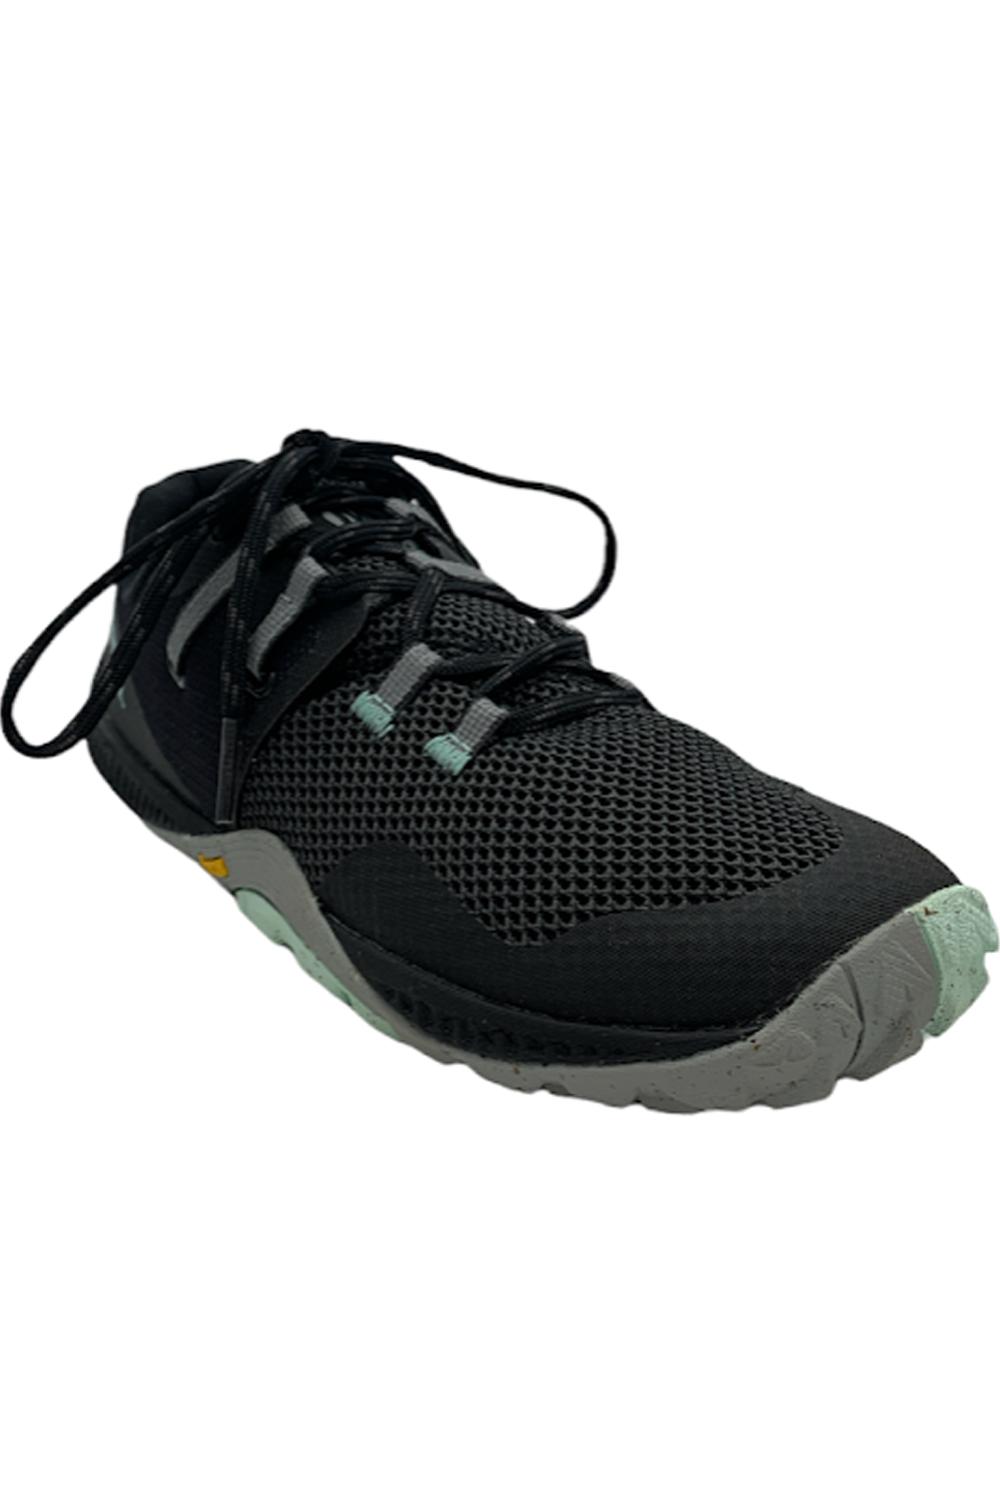 Merrell Lace-Up Performance Sneakers Trail Glove 6 Black | Jender